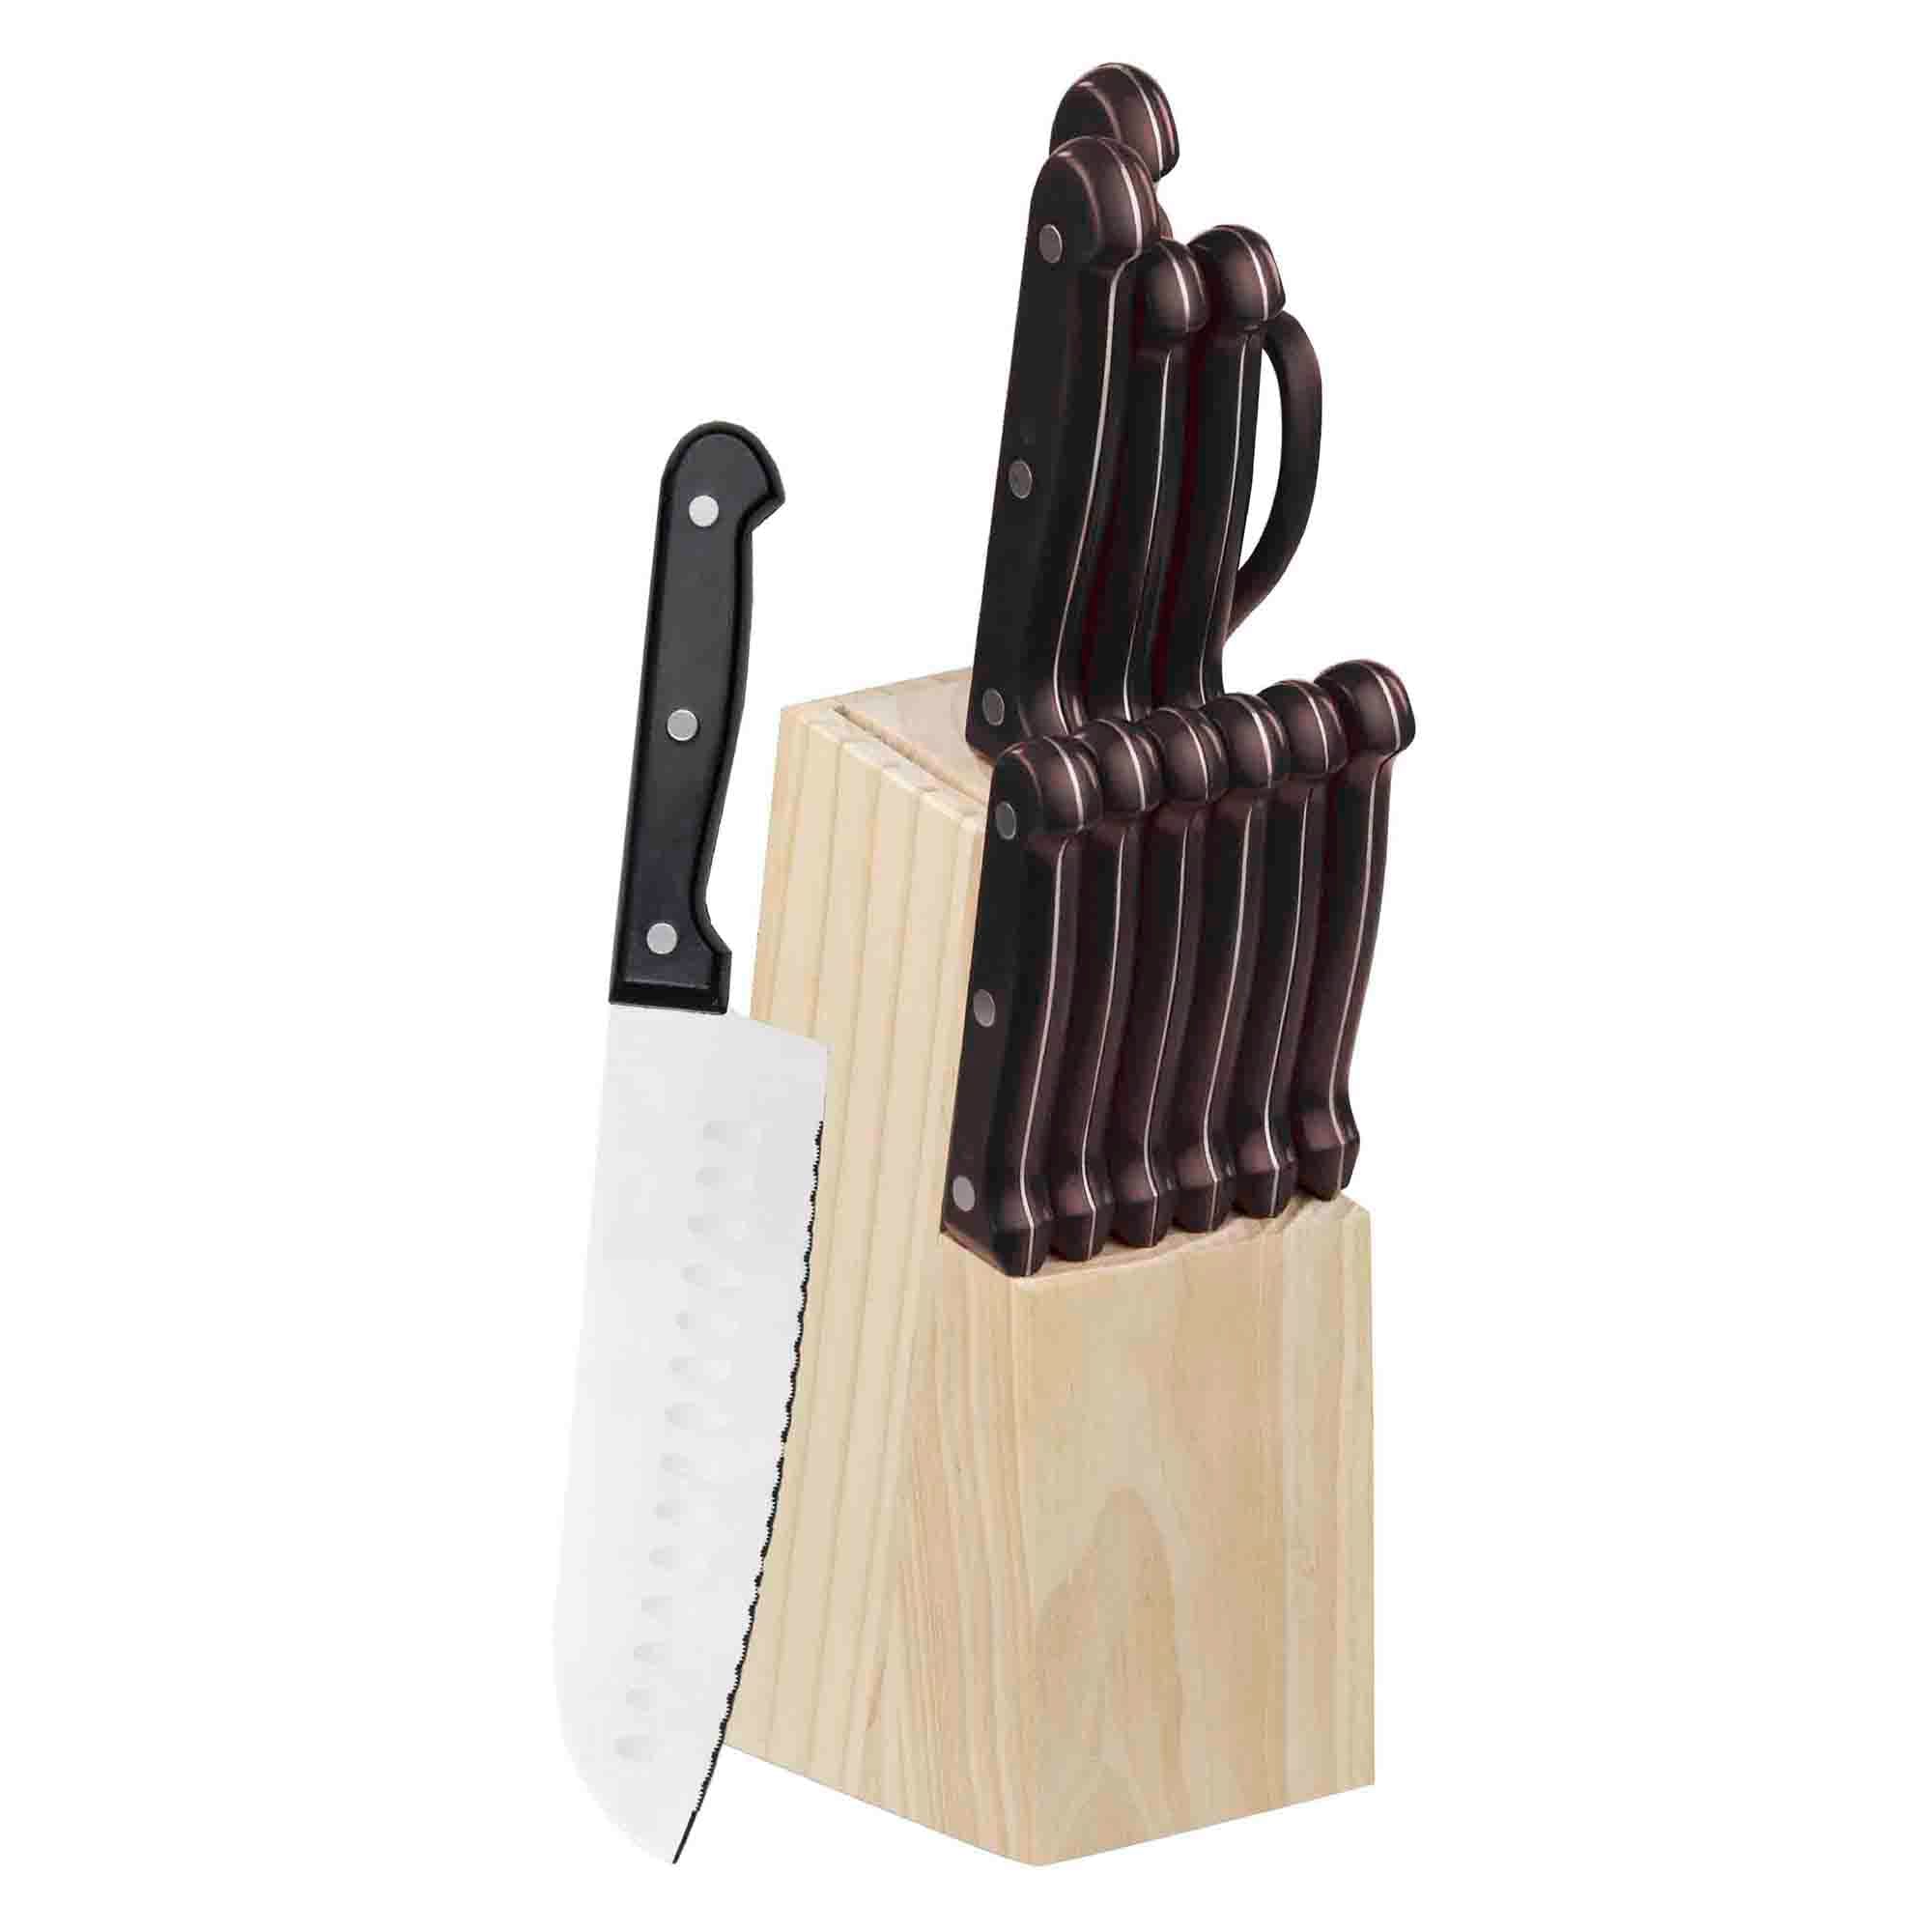 Home Basics 13 Piece Knife Set with Block in Black $10.00 EACH, CASE PACK OF 12